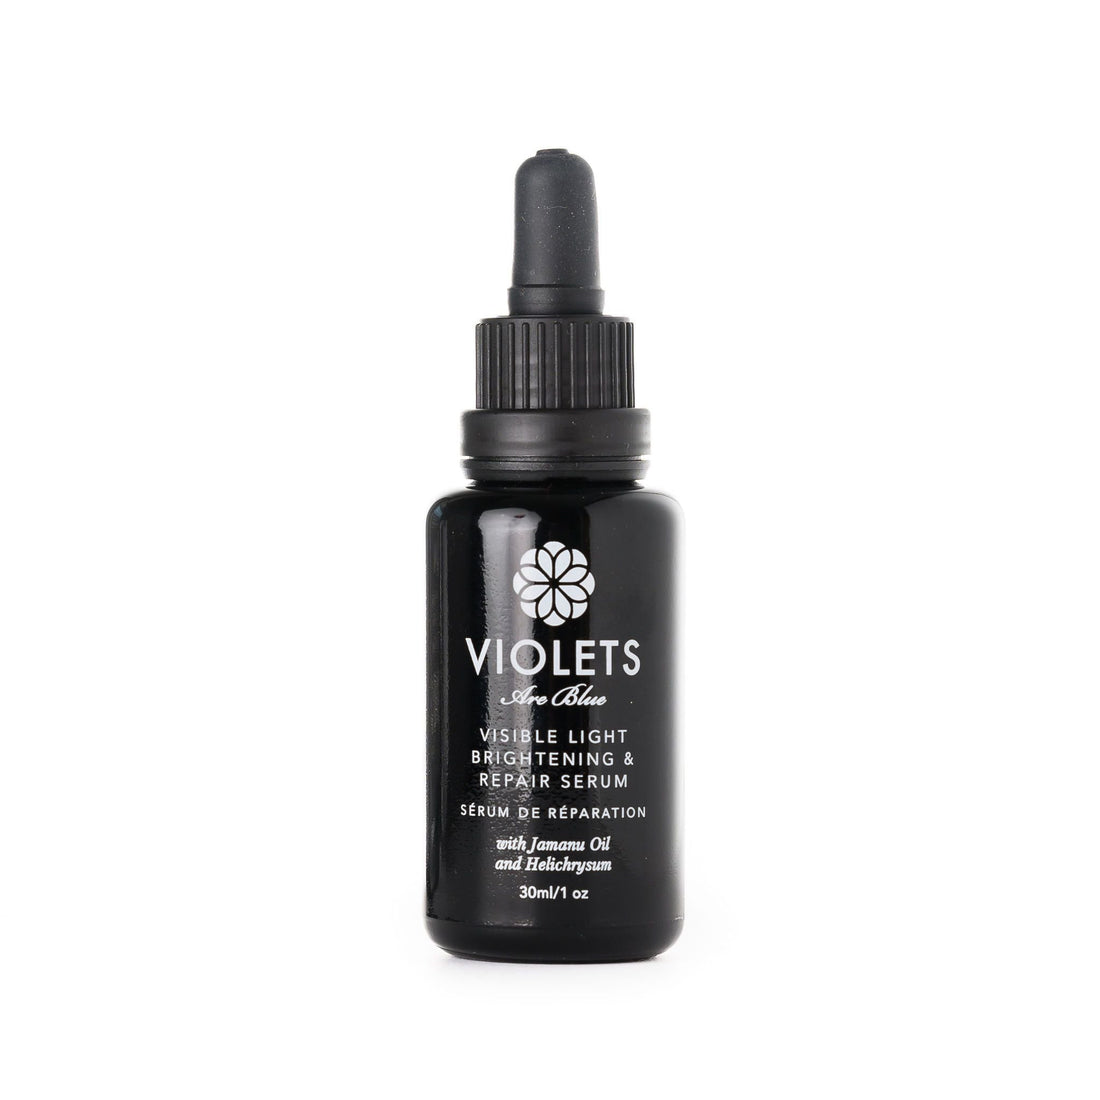 Visible Light Brightening and Repair Serum - Violets Are Blue